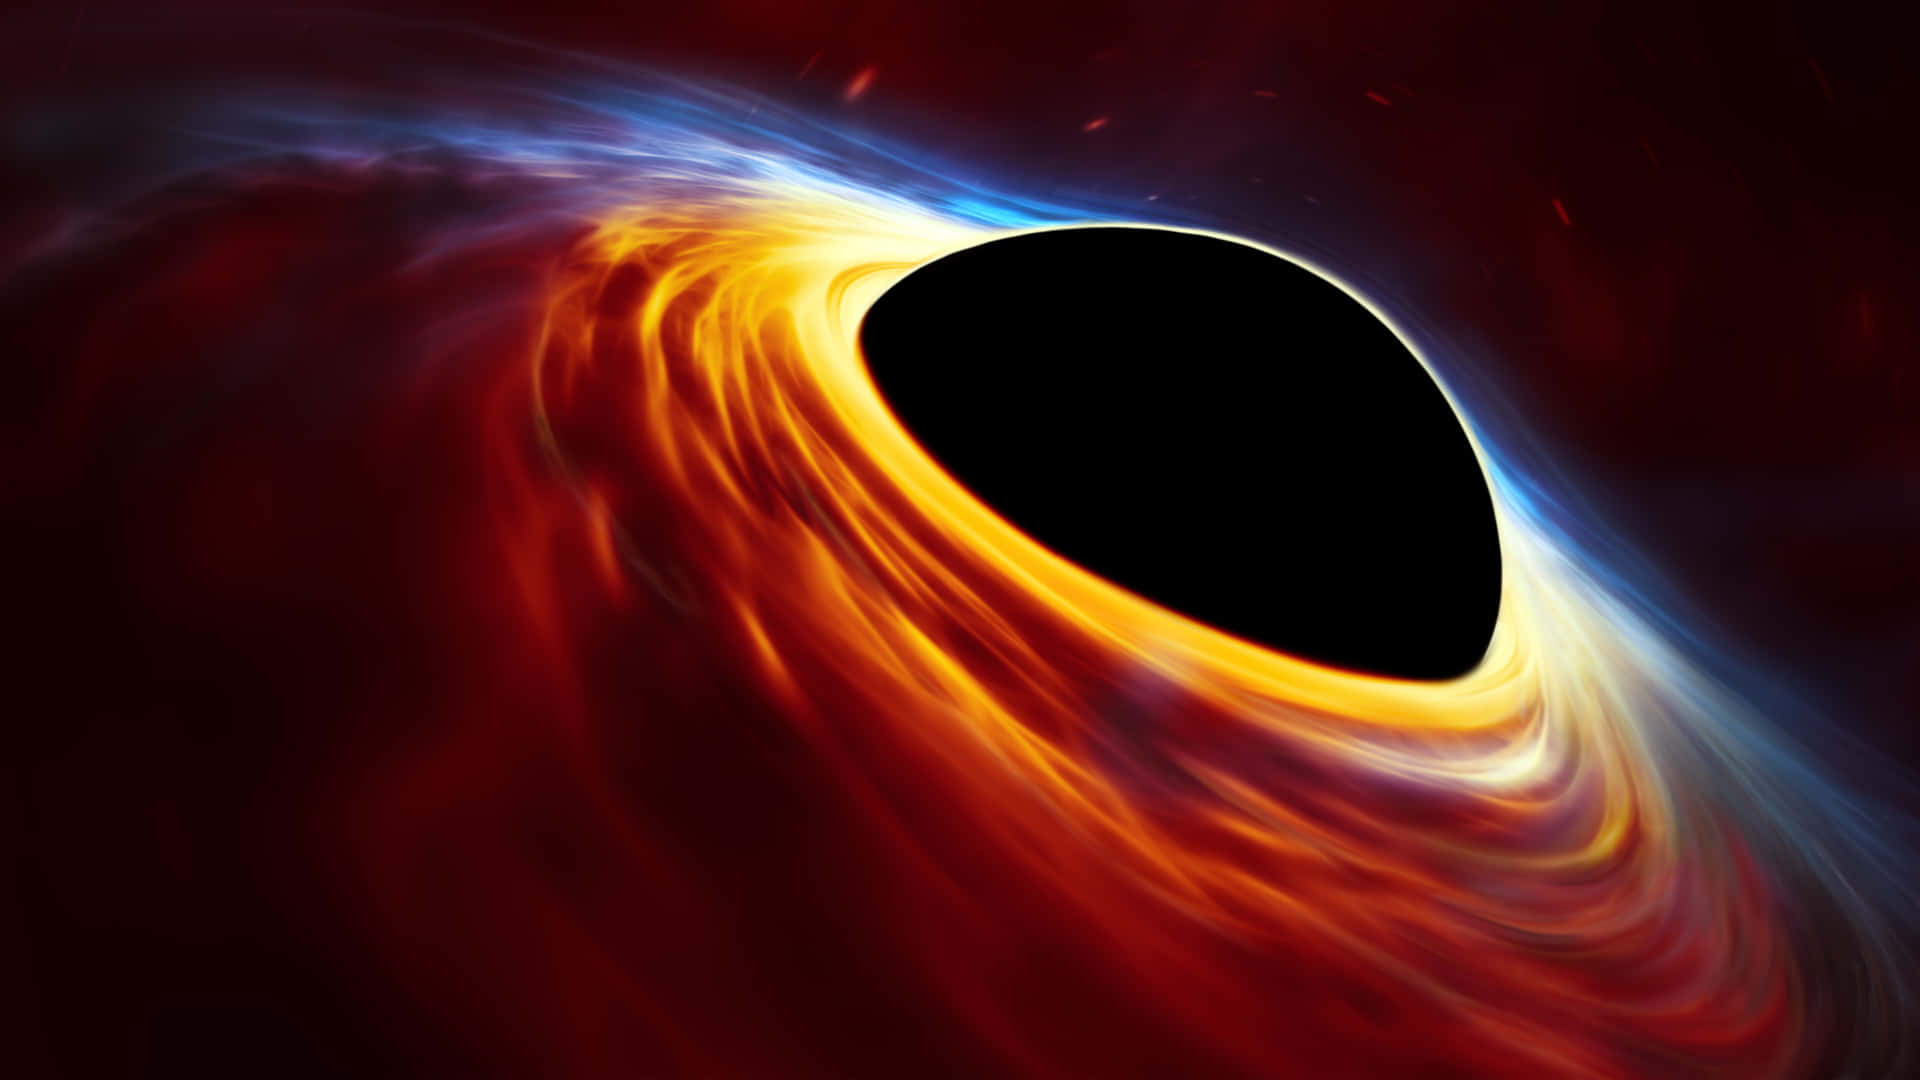 A Black Hole With A Bright Light In The Middle Wallpaper